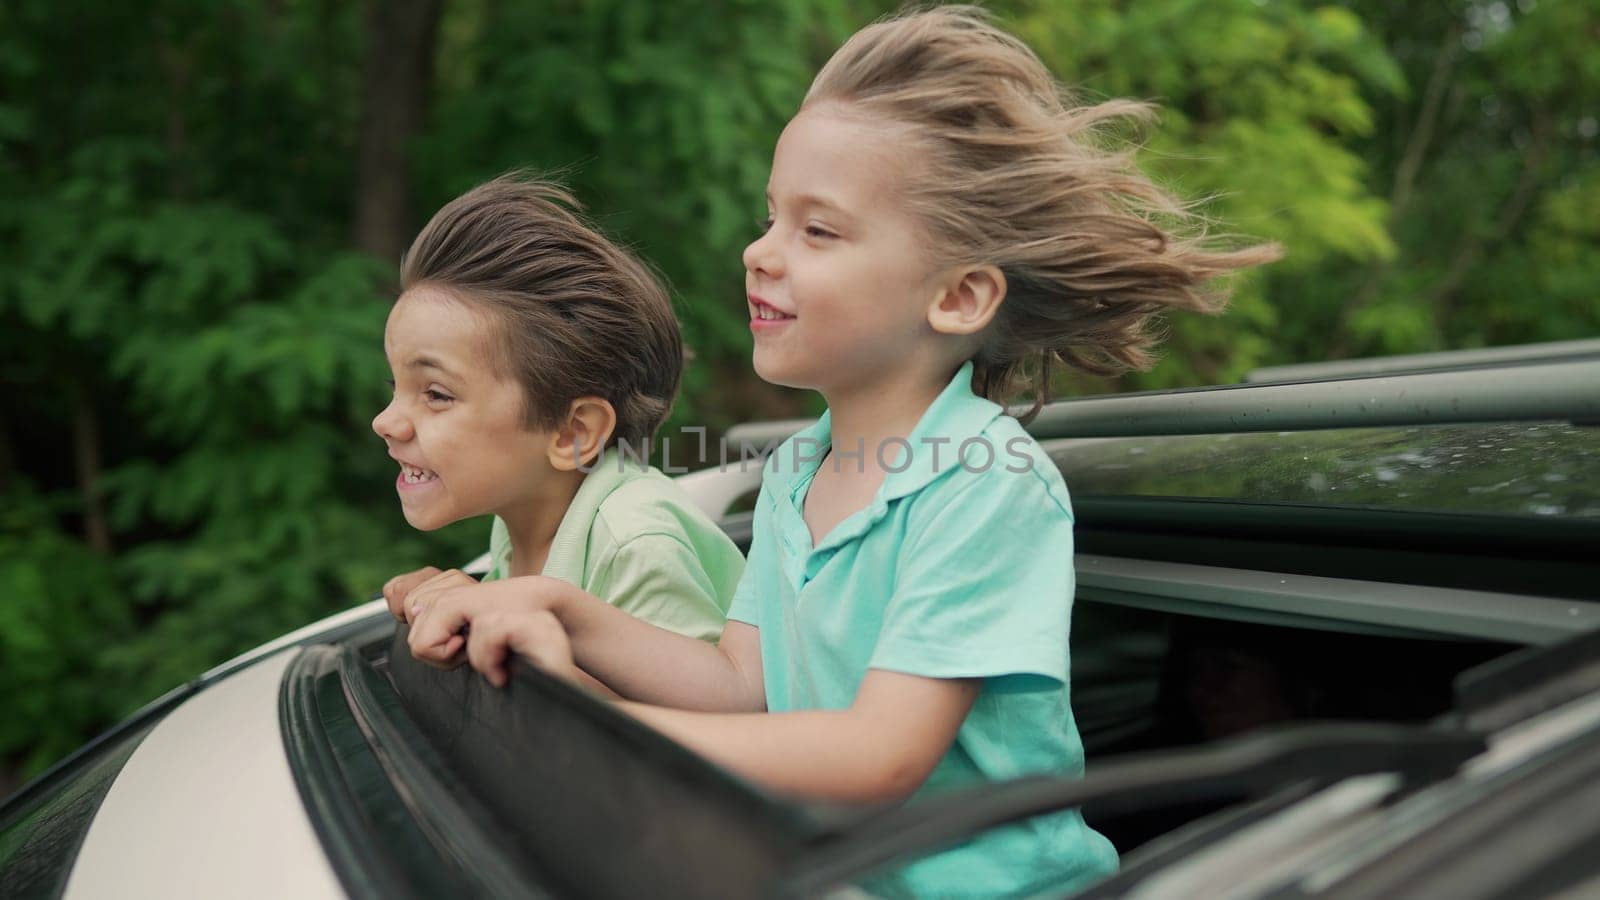 Adorable happy little kids stands in open car sunroof during road trip in countryside at summer. Concept of family leisure, active traveling. High quality